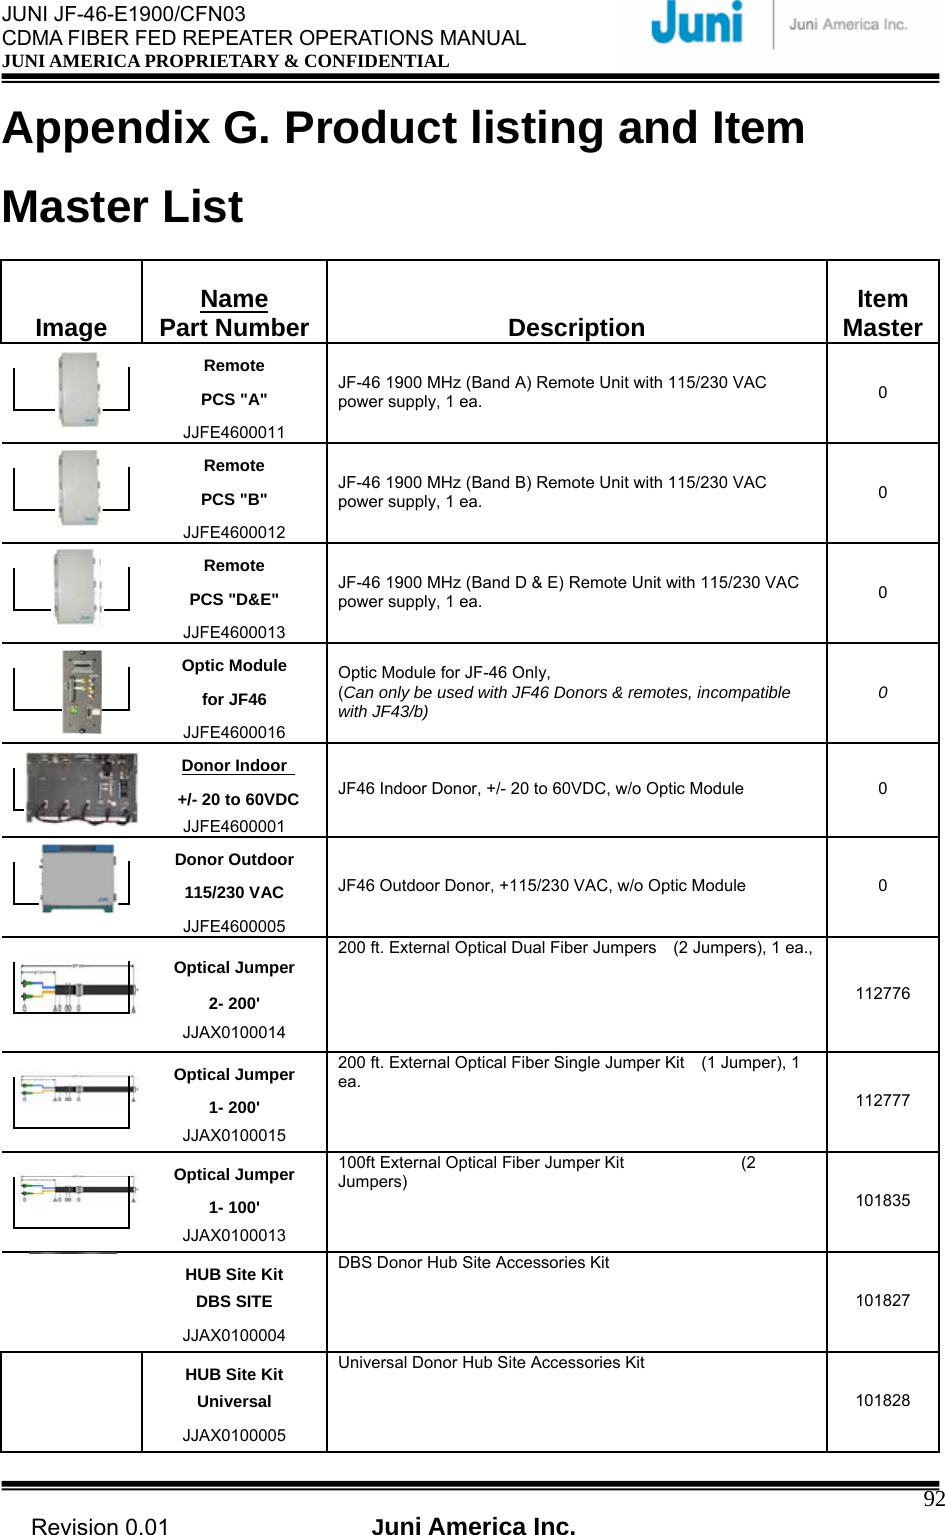  JUNI JF-46-E1900/CFN03 CDMA FIBER FED REPEATER OPERATIONS MANUAL JUNI AMERICA PROPRIETARY &amp; CONFIDENTIAL                                   Revision 0.01  Juni America Inc.  92Appendix G. Product listing and Item Master List Image  Name Part Number  Description  Item MasterRemote PCS &quot;A&quot;    JJFE4600011 JF-46 1900 MHz (Band A) Remote Unit with 115/230 VAC power supply, 1 ea.  0 Remote PCS &quot;B&quot;     JJFE4600012 JF-46 1900 MHz (Band B) Remote Unit with 115/230 VAC power supply, 1 ea.  0 Remote PCS &quot;D&amp;E&quot;     JJFE4600013 JF-46 1900 MHz (Band D &amp; E) Remote Unit with 115/230 VAC power supply, 1 ea.  0 Optic Module for JF46     JJFE4600016 Optic Module for JF-46 Only,   (Can only be used with JF46 Donors &amp; remotes, incompatible with JF43/b) 0 Donor Indoor     +/- 20 to 60VDC     JJFE4600001 JF46 Indoor Donor, +/- 20 to 60VDC, w/o Optic Module      0 Donor Outdoor   115/230 VAC     JJFE4600005 JF46 Outdoor Donor, +115/230 VAC, w/o Optic Module      0 Optical Jumper 2- 200&apos;       JJAX0100014 200 ft. External Optical Dual Fiber Jumpers    (2 Jumpers), 1 ea.,   112776 Optical Jumper 1- 200&apos;       JJAX0100015 200 ft. External Optical Fiber Single Jumper Kit    (1 Jumper), 1 ea. 112777 Optical Jumper 1- 100&apos;       JJAX0100013 100ft External Optical Fiber Jumper Kit              (2 Jumpers) 101835 HUB Site Kit DBS SITE   JJAX0100004 DBS Donor Hub Site Accessories Kit 101827 HUB Site Kit Universal   JJAX0100005 Universal Donor Hub Site Accessories Kit 101828 